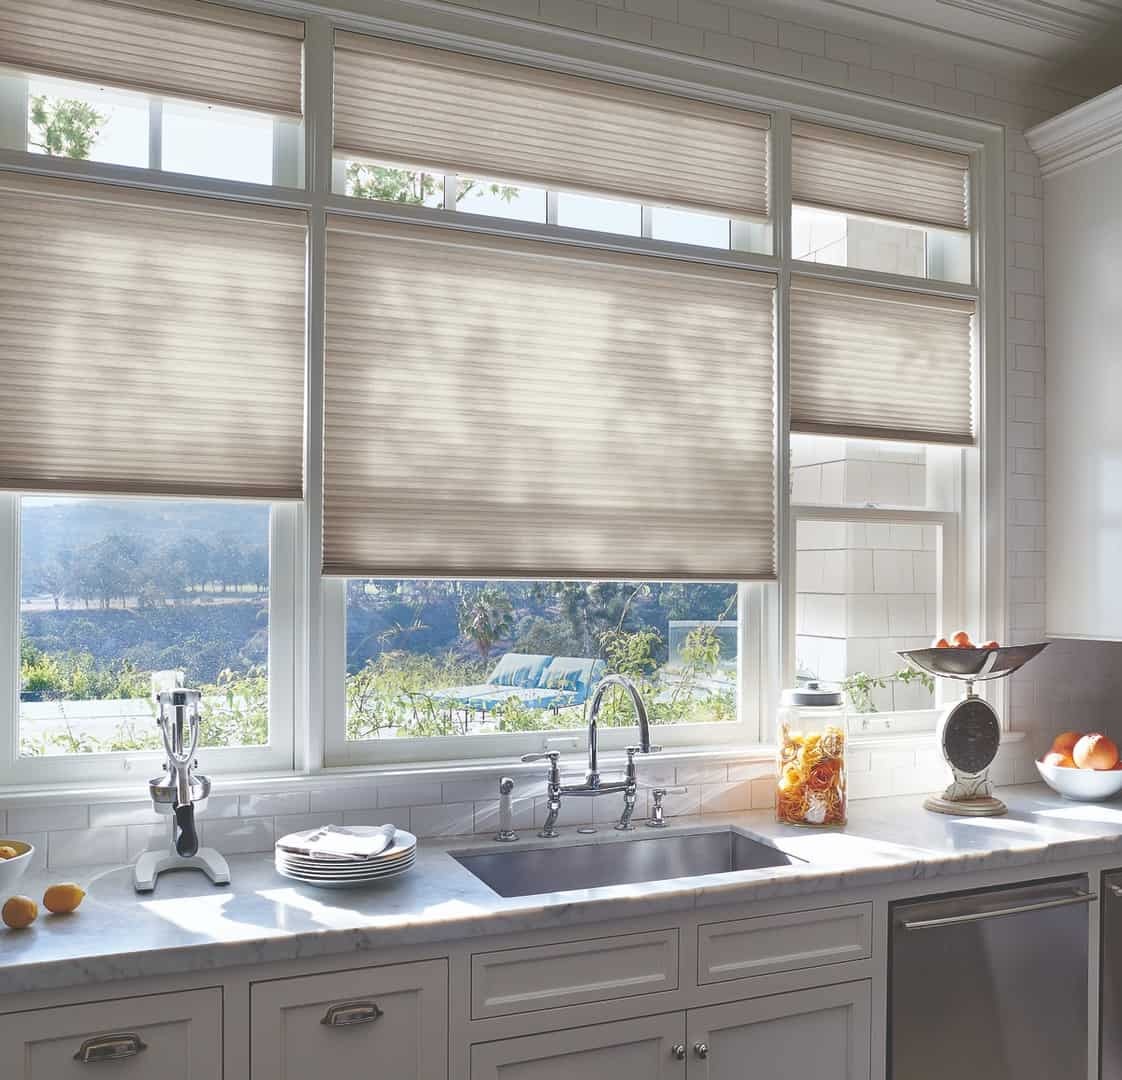 The Benefits of Honeycomb Shades Near Stuart, Florida (FL) like Duette for Kitchens with Automation